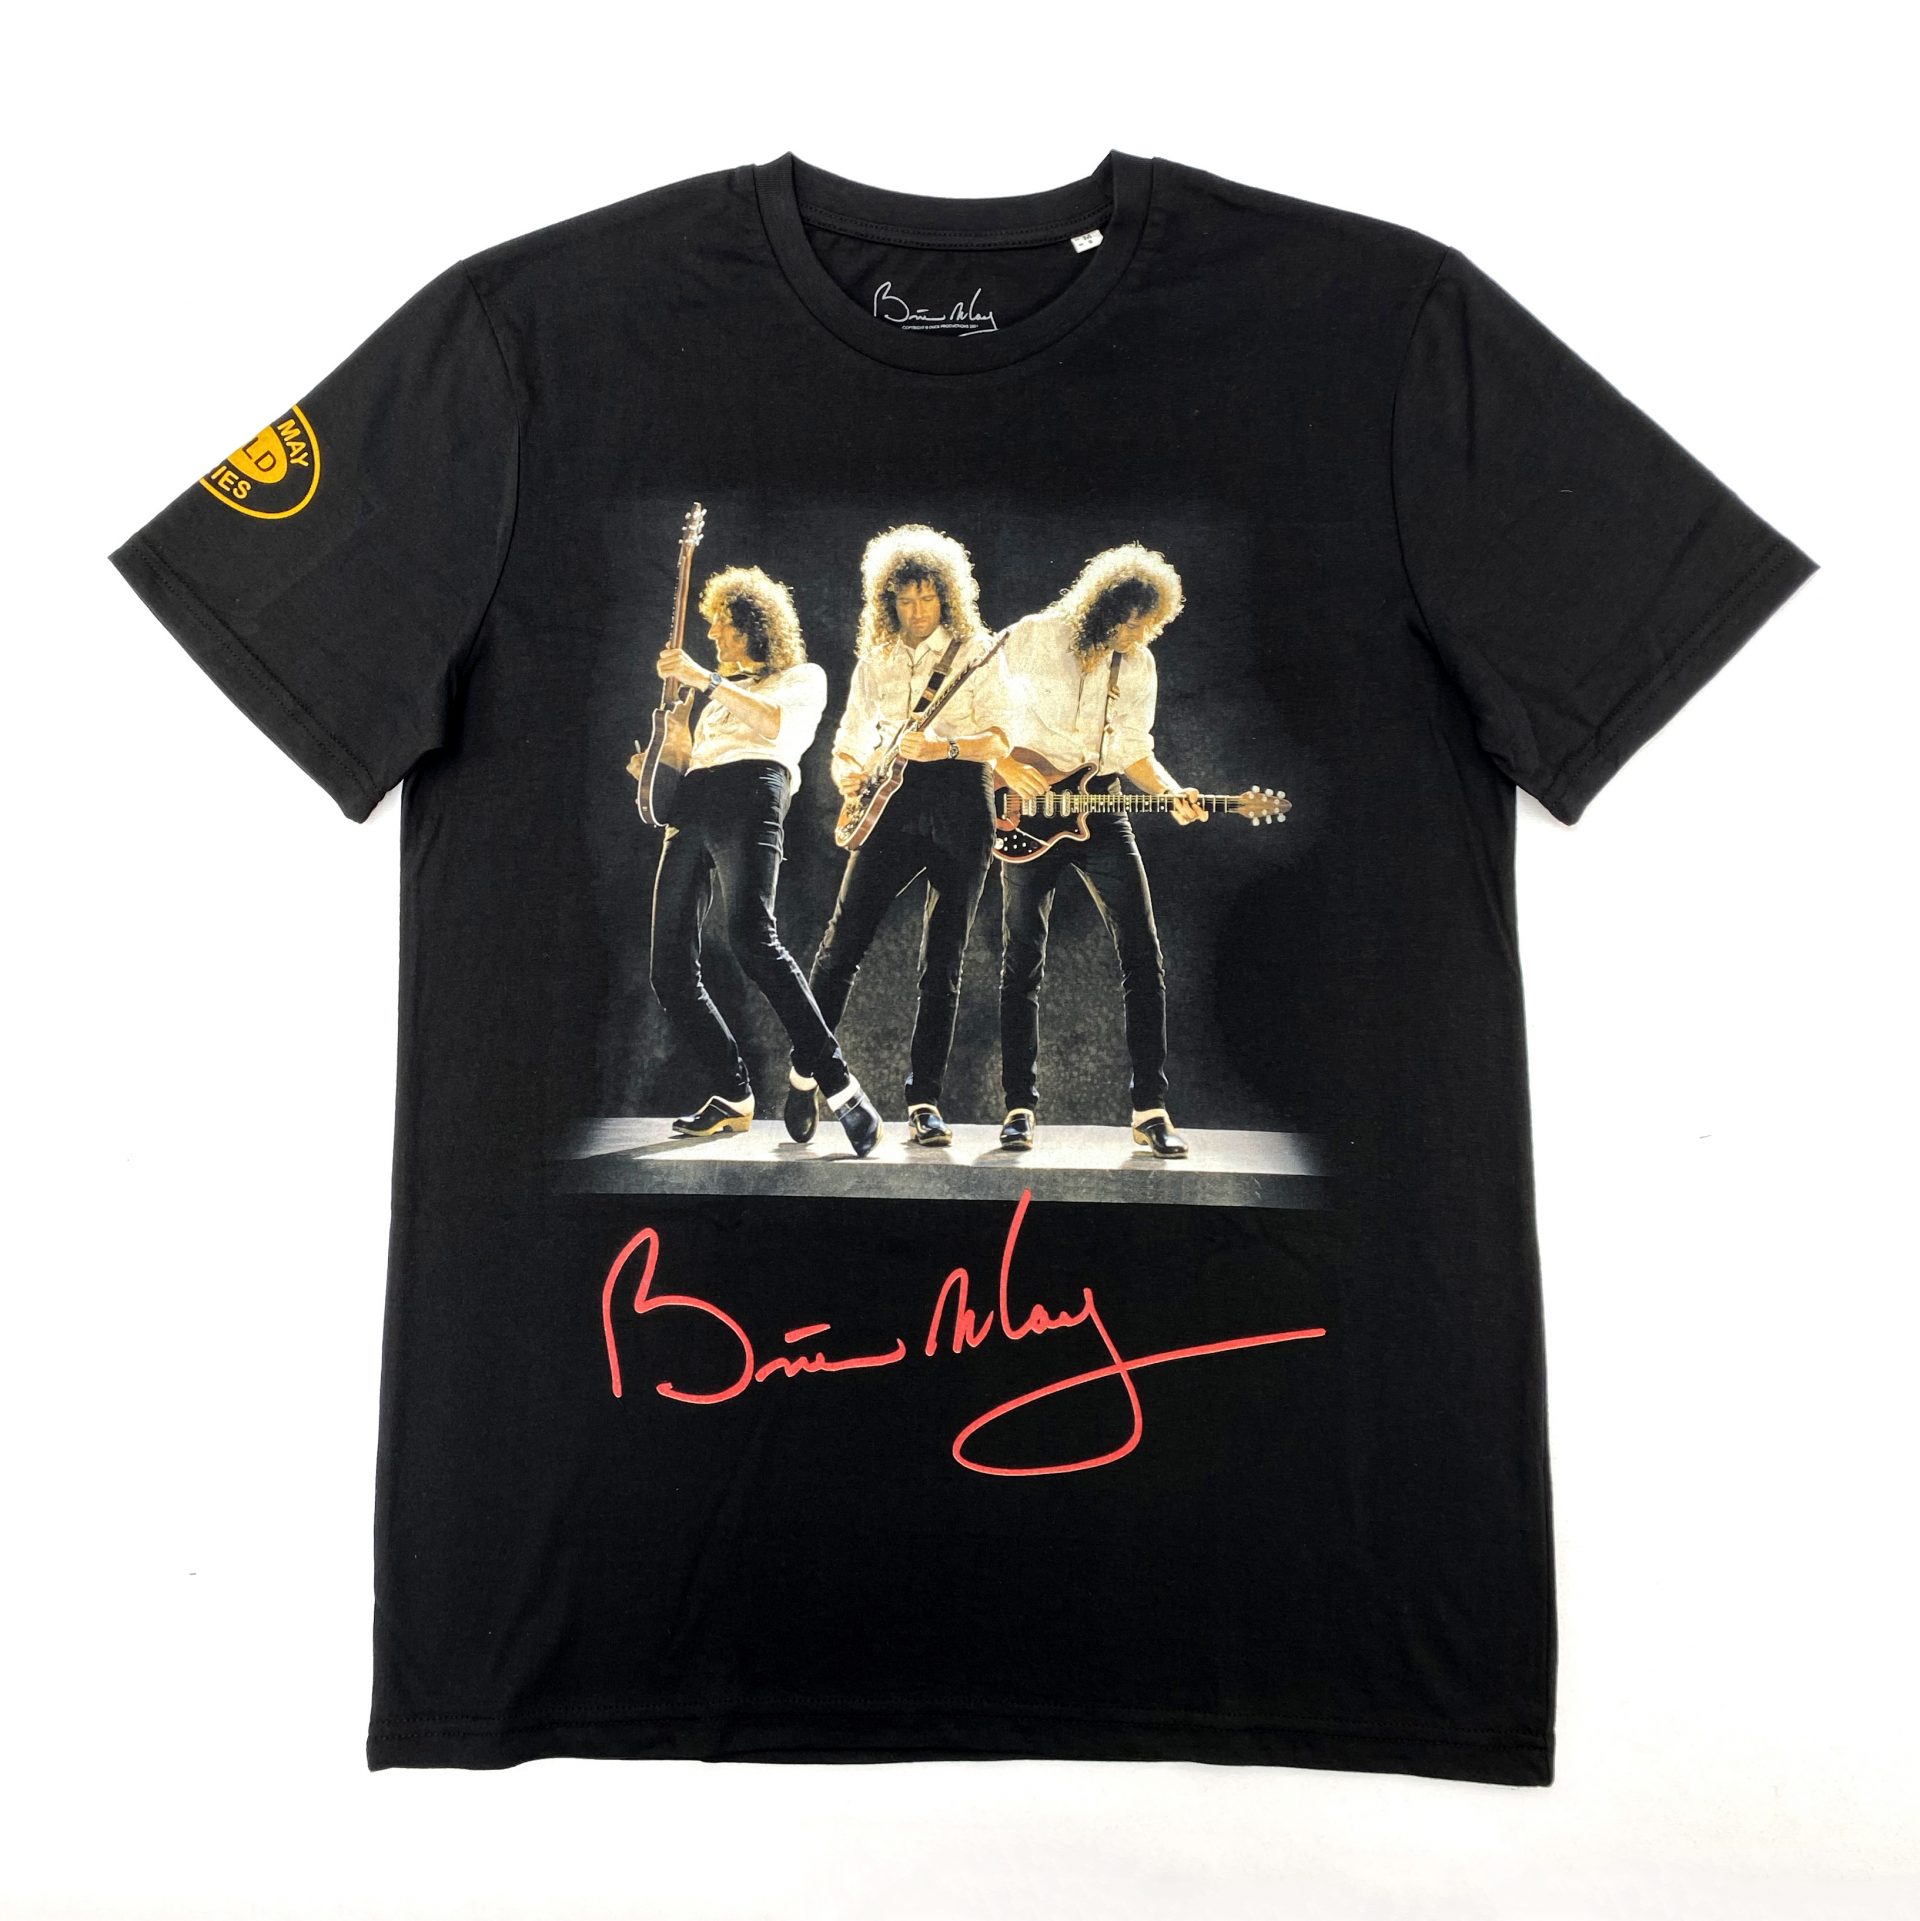 DTG printed Stanly Stella t-shirt with Brian May playing the guitar by Paul Bristow